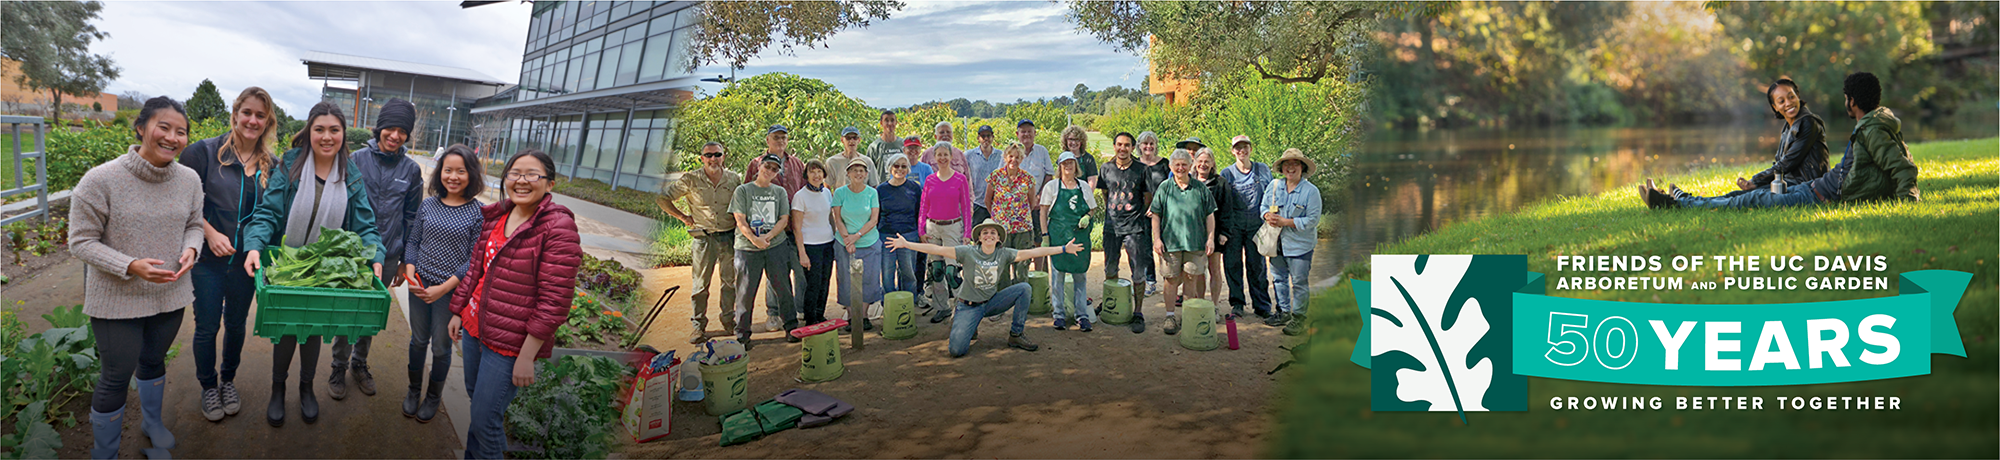 Images of visitors, students and volunteers at the Arboretum with the Friends 50th Anniversary logo and caption "growing better together"